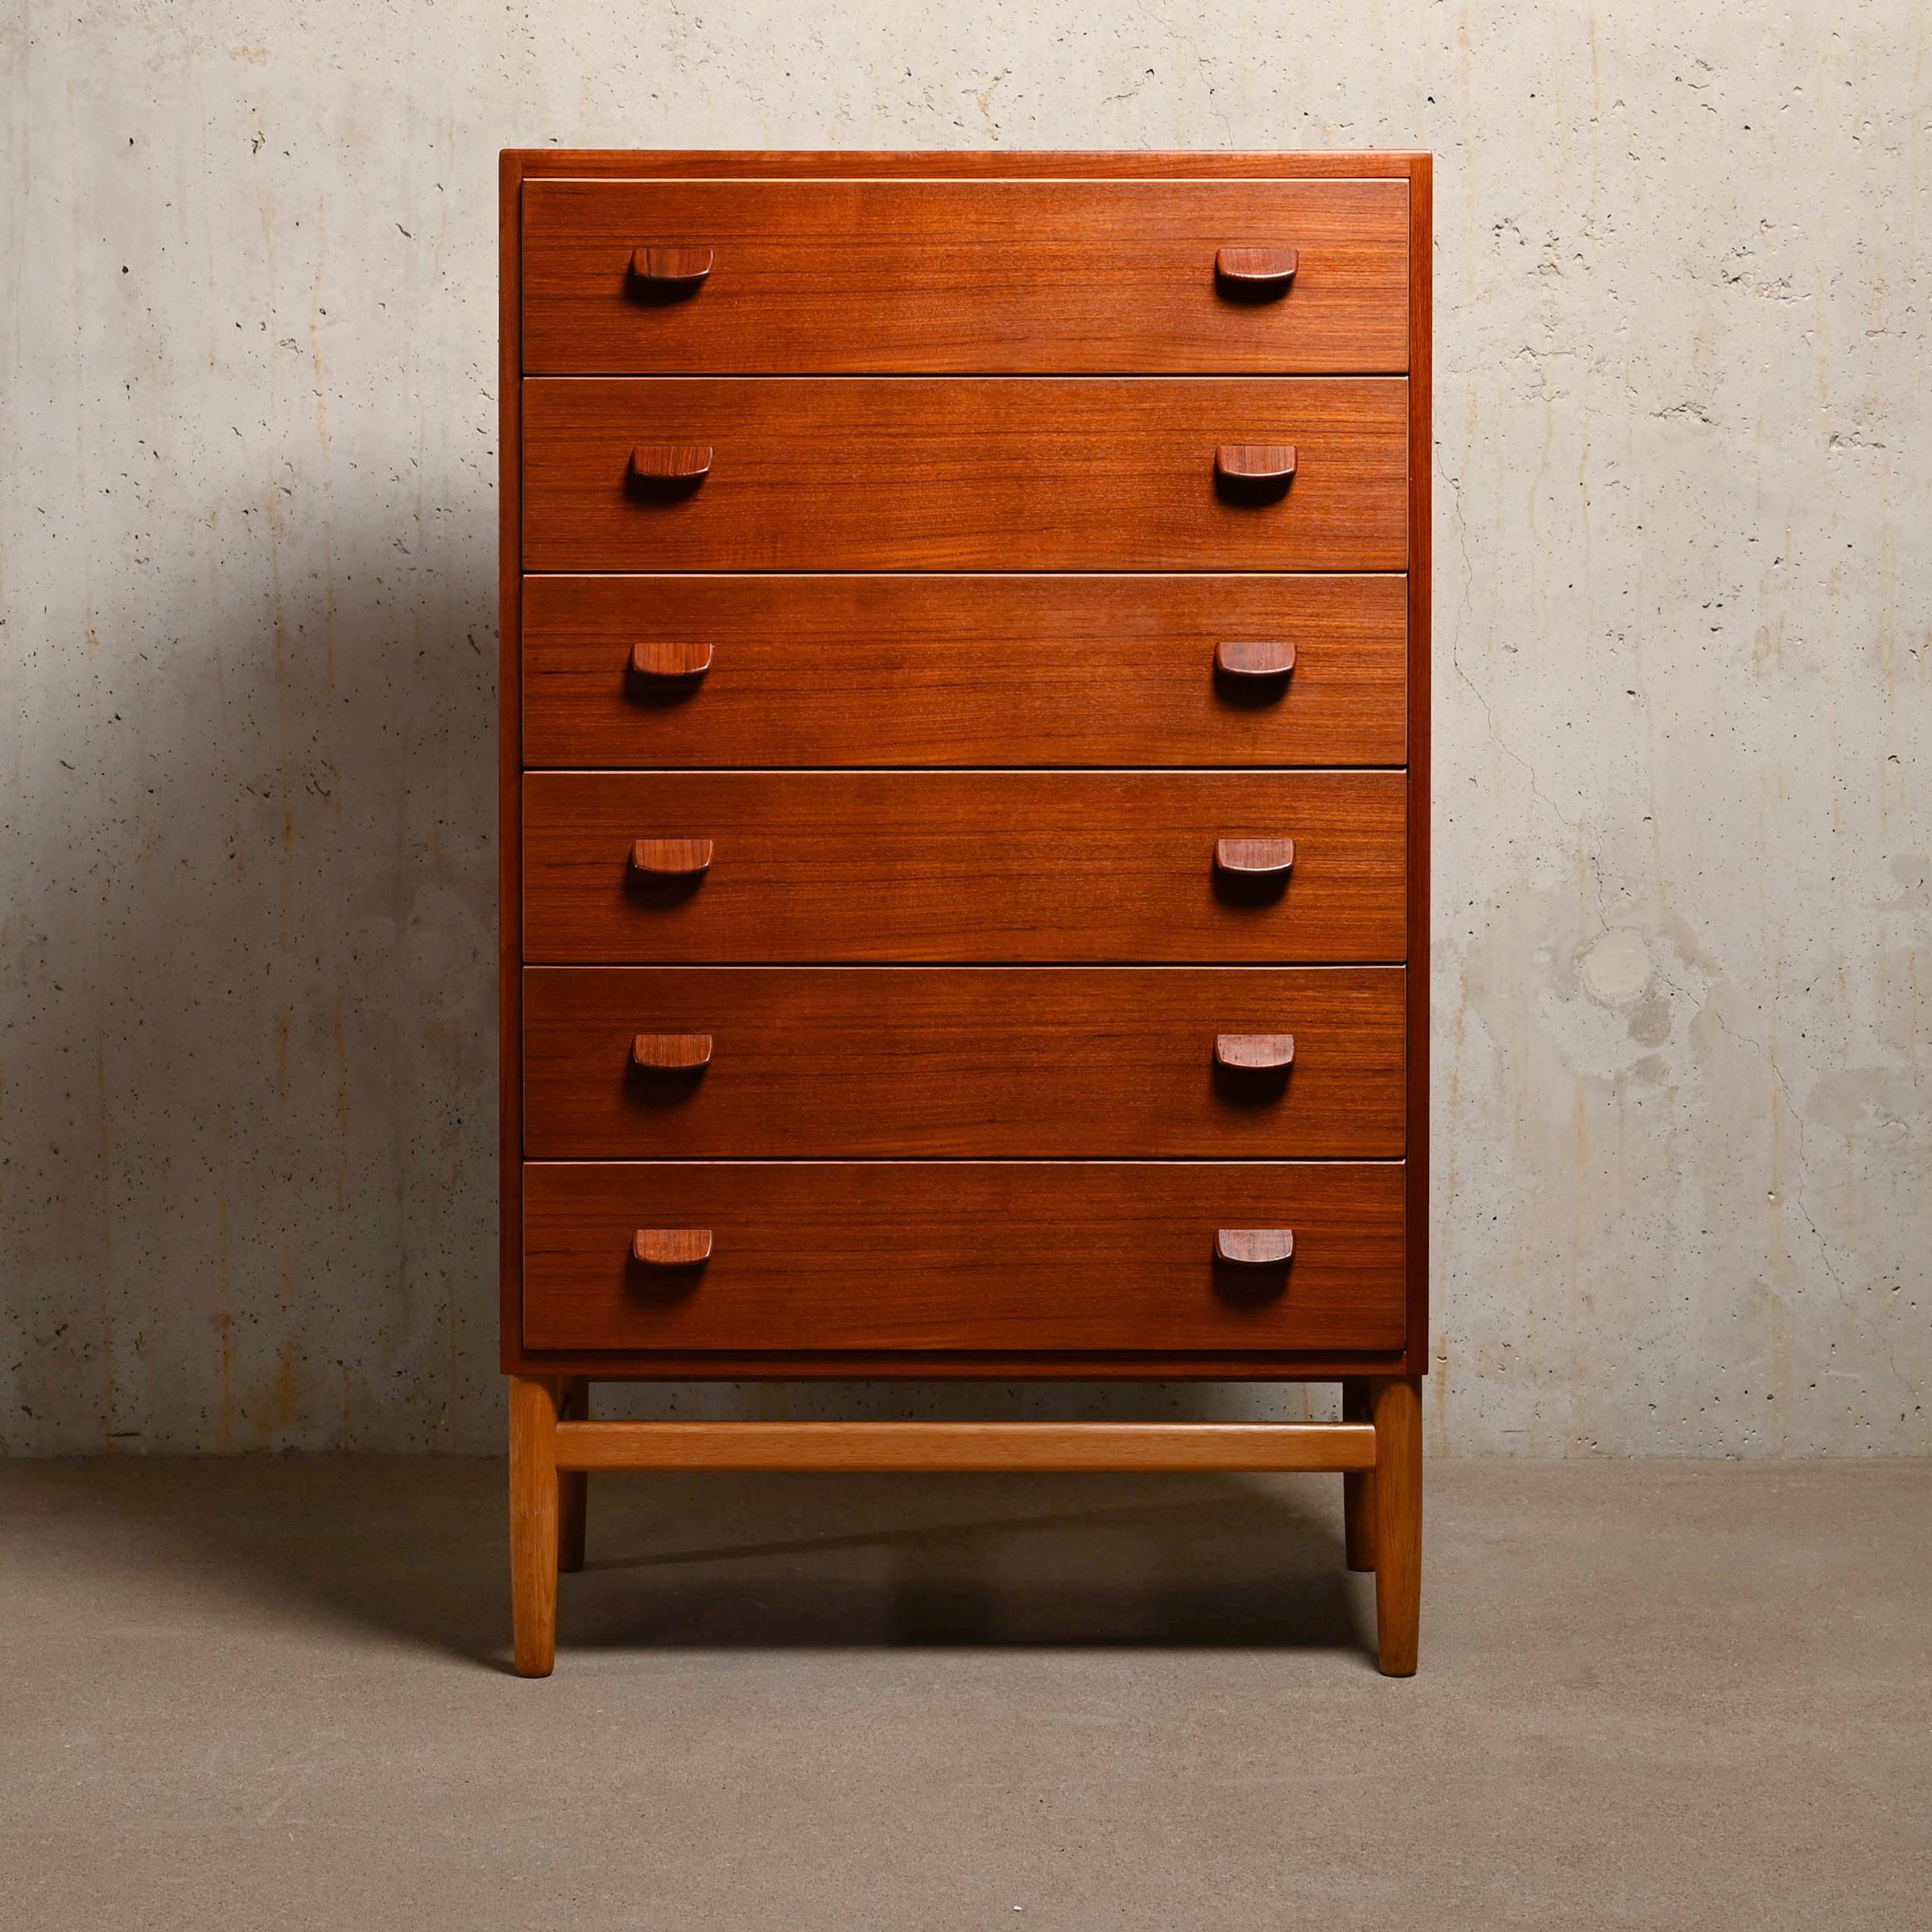 Danish Poul Volther Chest of Drawers, Model F17 in teak and oak for FDB Møbler, Denmark